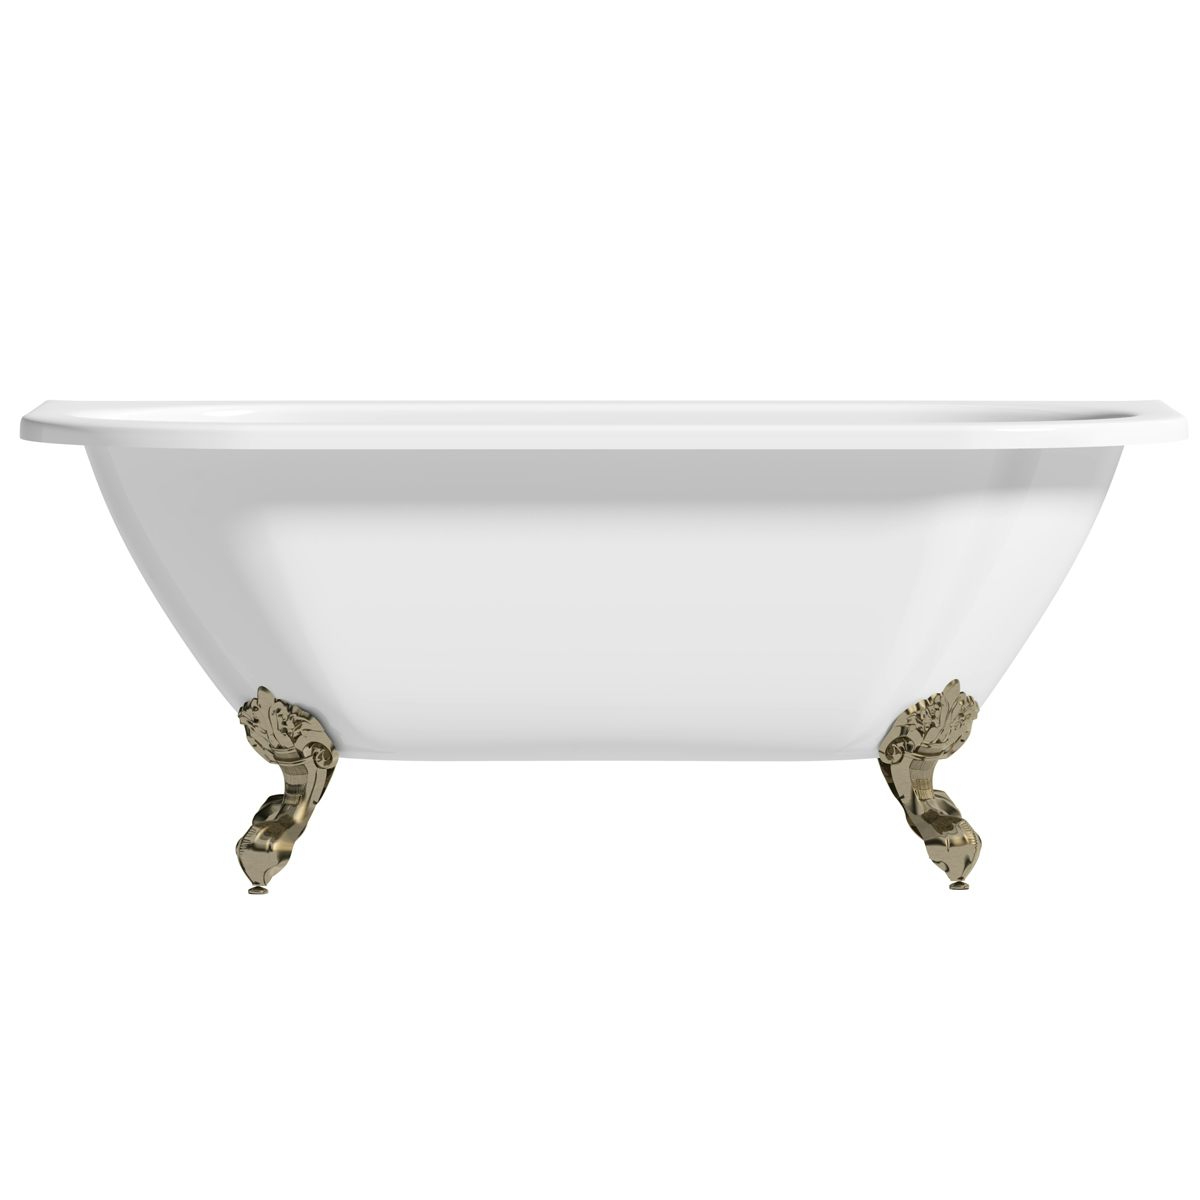 The Bath Co. Dalston back to wall freestanding bath with antique bronze ball and claw feet